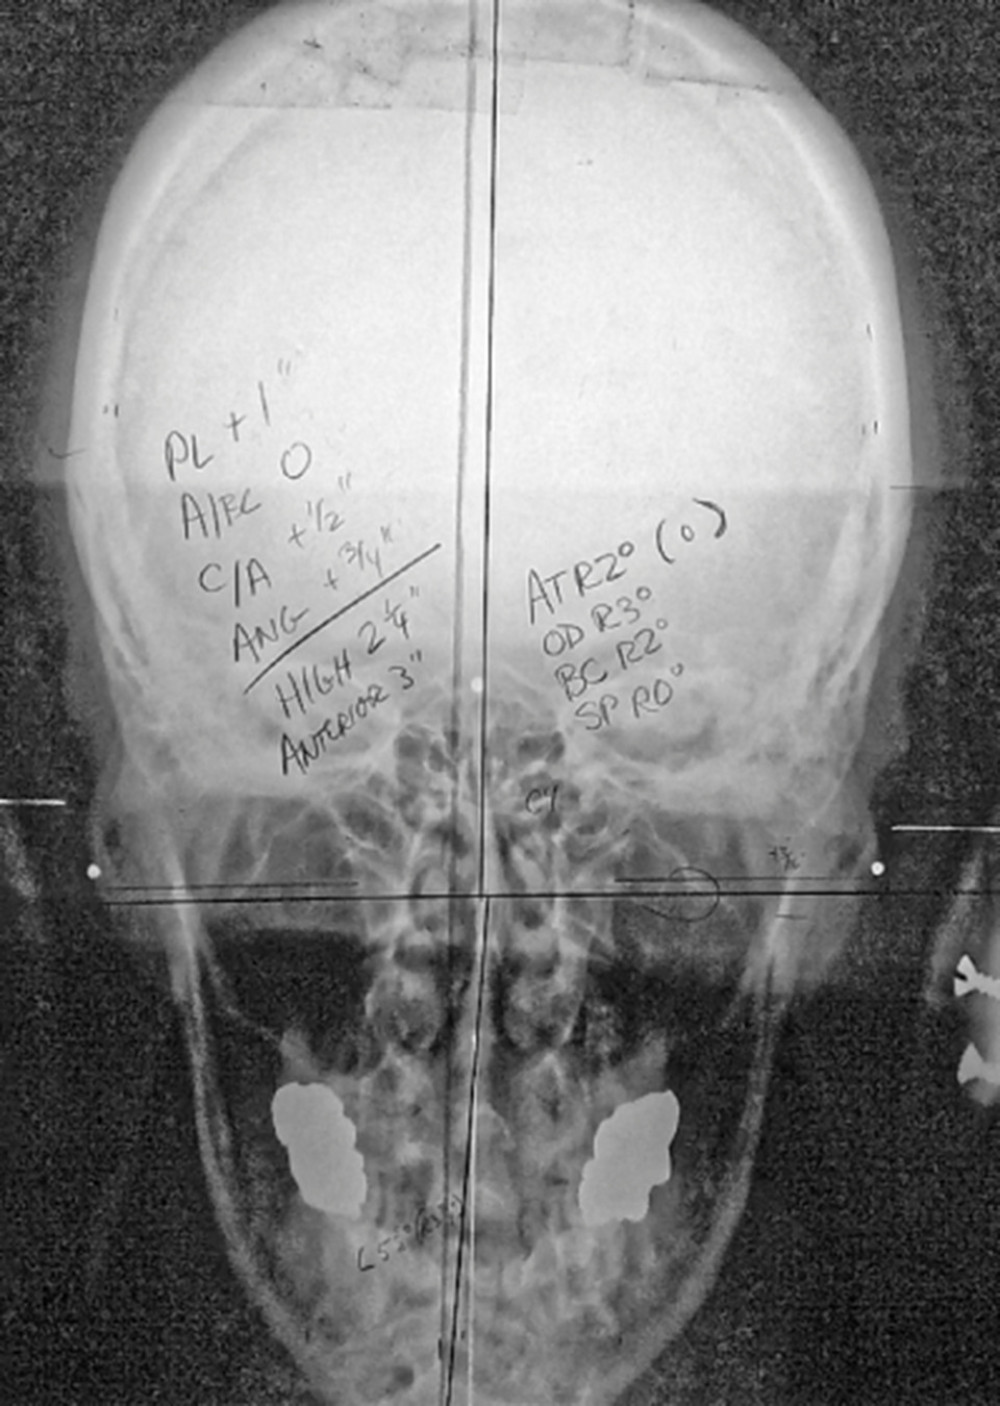 The frontal (nasium) radiograph depicts excursion of the cervical spine into the right frontal plane, creating an acute angle between the atlas (C1) and the skull (C0). The right side of the patient is on the right. On the right of the center line is recorded the elements of the misalignment: AT (atlas) right 2 degrees, OD (odontoid) right 3 degrees, BC (C2 body center) right 2 degrees, SP (spinous process of C2) right 0 degrees. To the left of center line is the calculated correction vector designed to restore the system to the vertical axis.